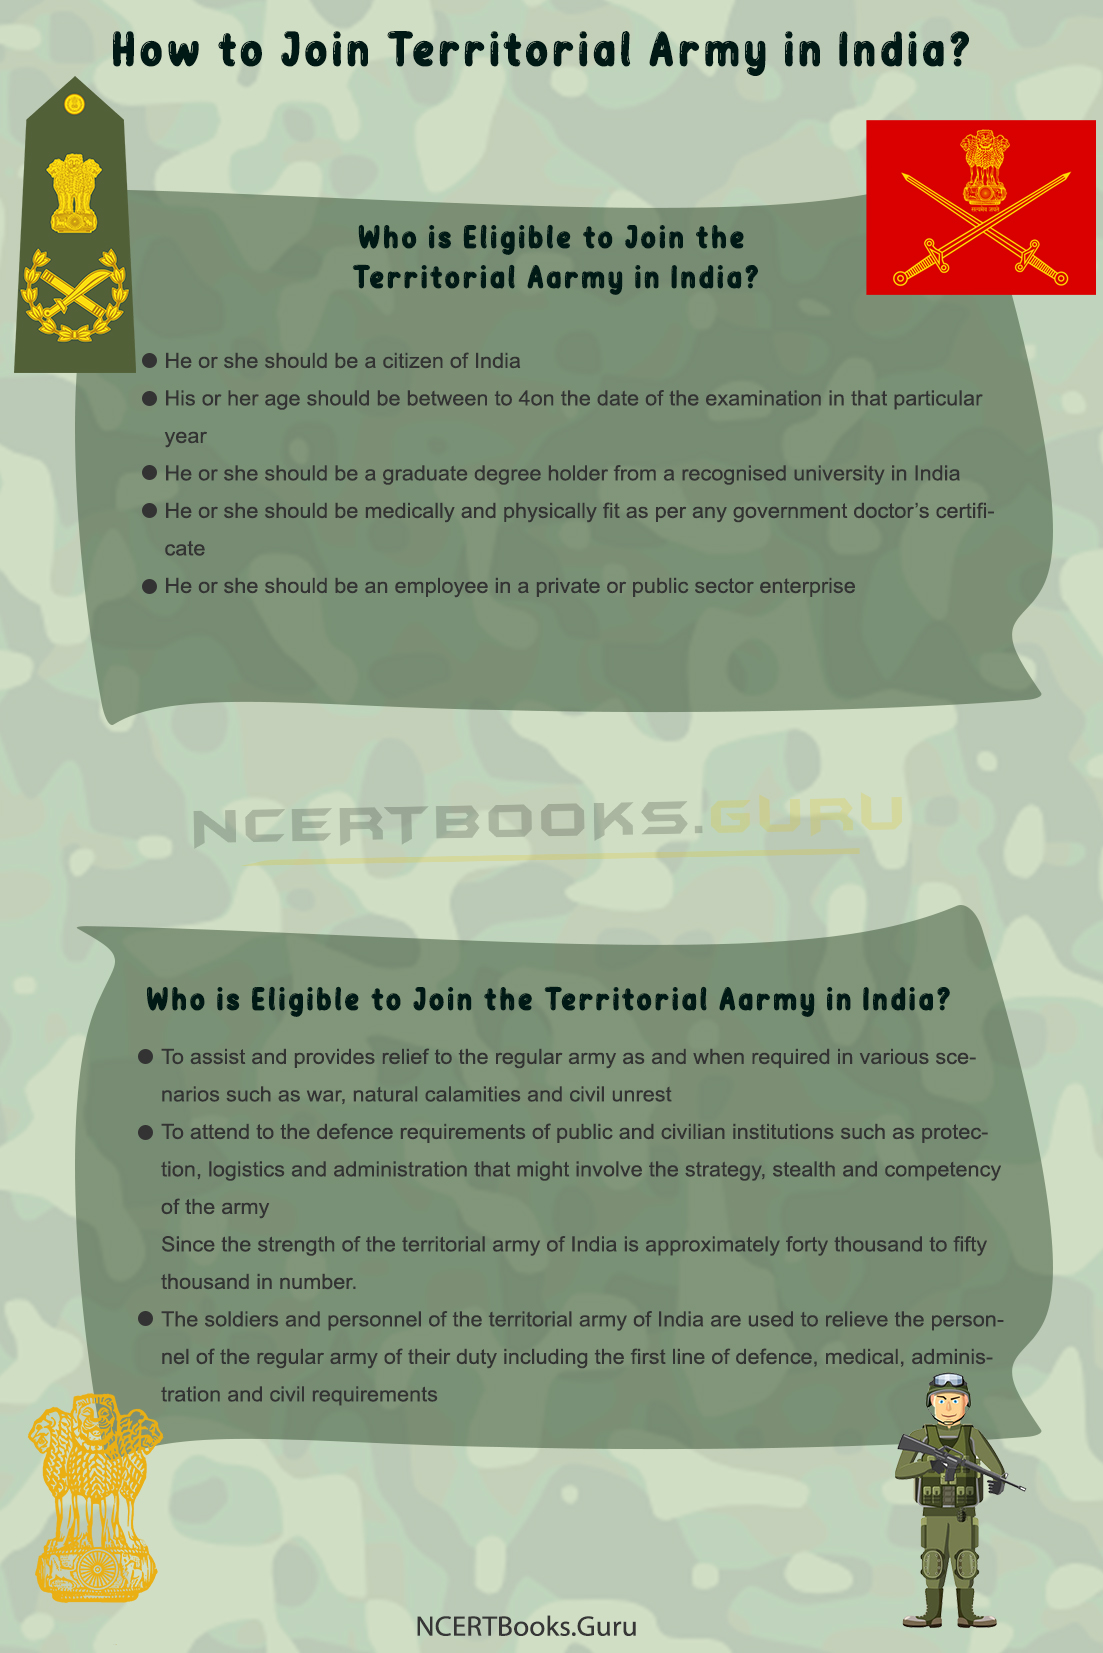 How to Join Territorial Army in India 2